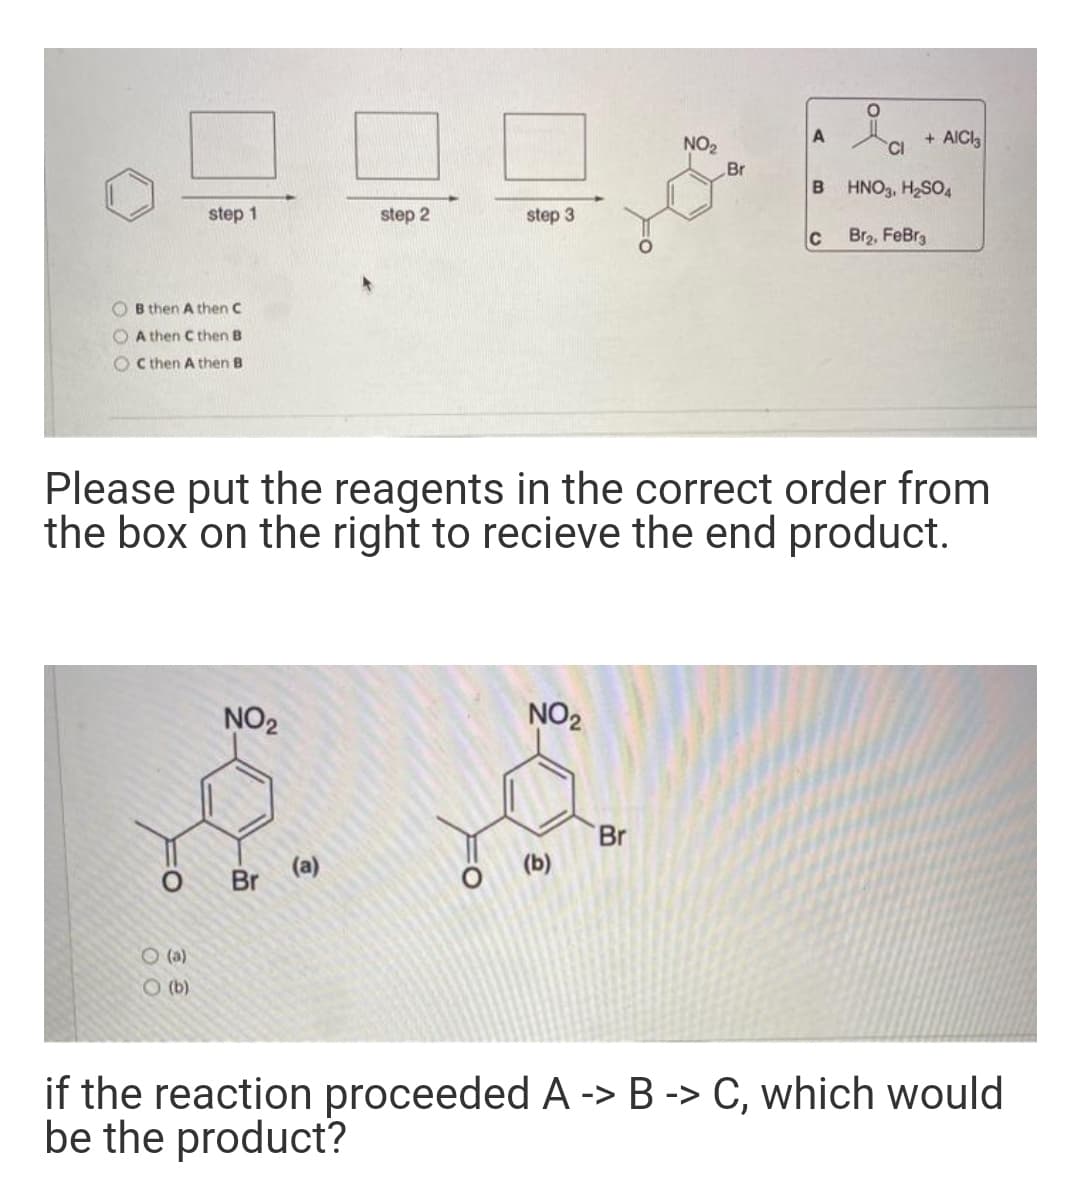 + AICI
CI
A
NO2
Br
HNO3, H2SO4
step 1
step 2
step 3
C
Br2, FeBrg
O B then A then C
A then C then B
O C then A then B
Please put the reagents in the correct order from
the box on the right to recieve the end product.
NO2
NO2
Br
(a)
Br
(b)
O (a)
O (b)
if the reaction proceeded A -> B -> C, which would
be the product?
